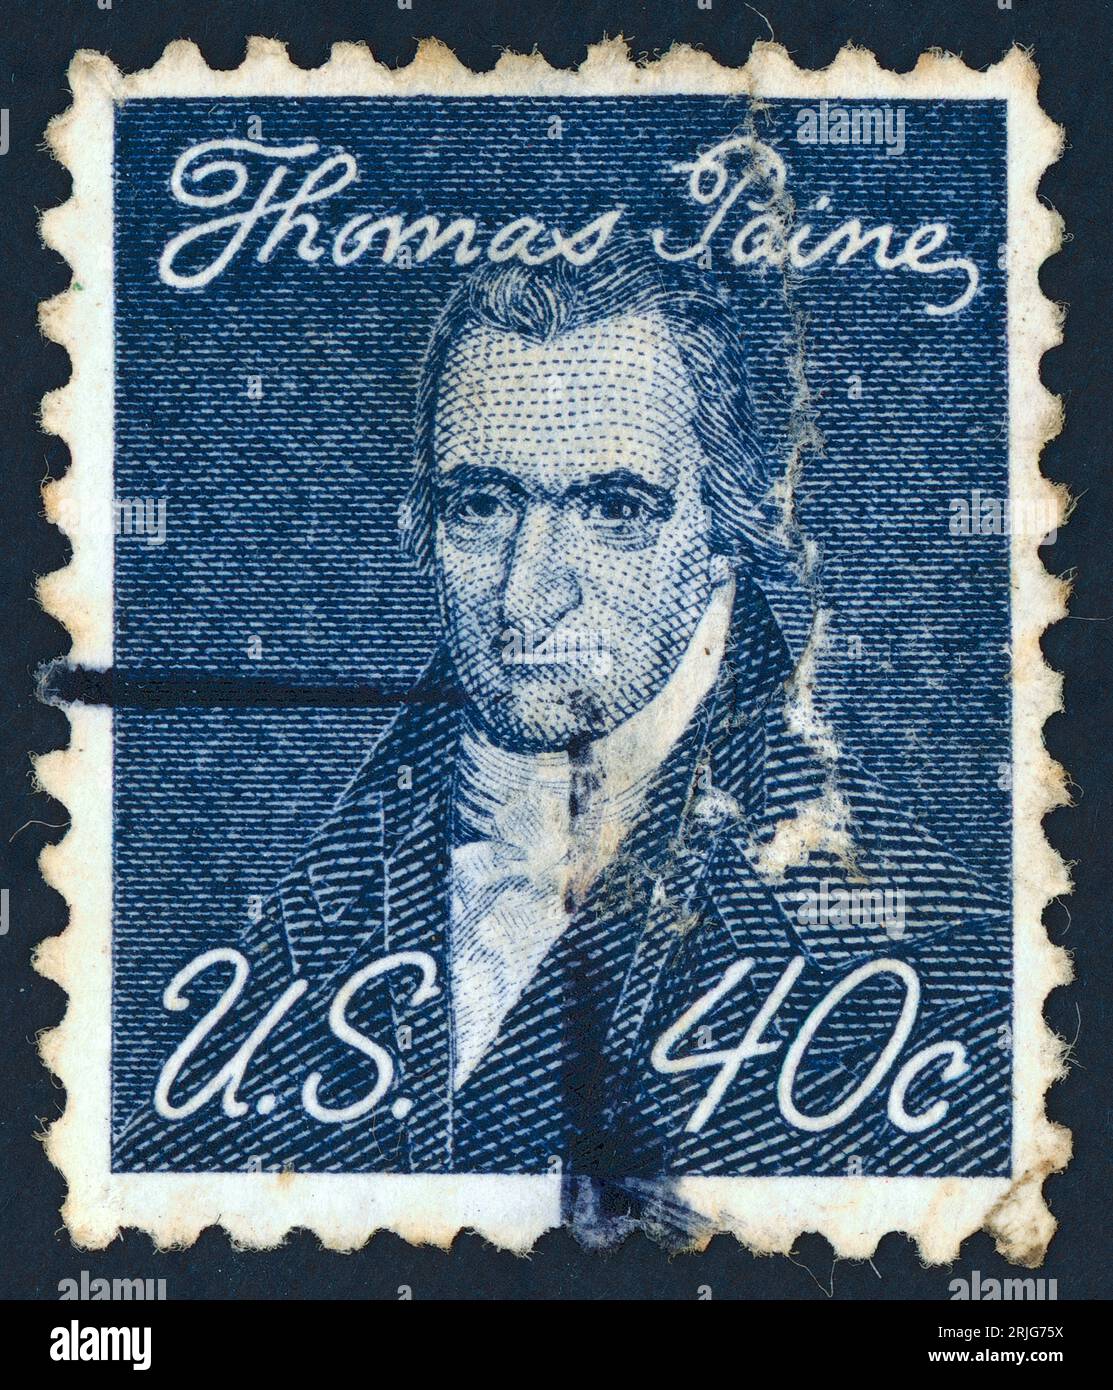 Thomas Paine (born Thomas Pain; 1737 – 1809). Postage stamp issued in the US in 1968. Thomas Paine was an English-born American Founding Father, political activist, philosopher, political theorist, and revolutionary. He authored Common Sense (1776) and The American Crisis (1776–1783), two of the most influential pamphlets at the start of the American Revolution, and he helped to inspire the Patriots in 1776 to declare independence from Great Britain. His ideas reflected Enlightenment-era ideals of human rights. Stock Photo